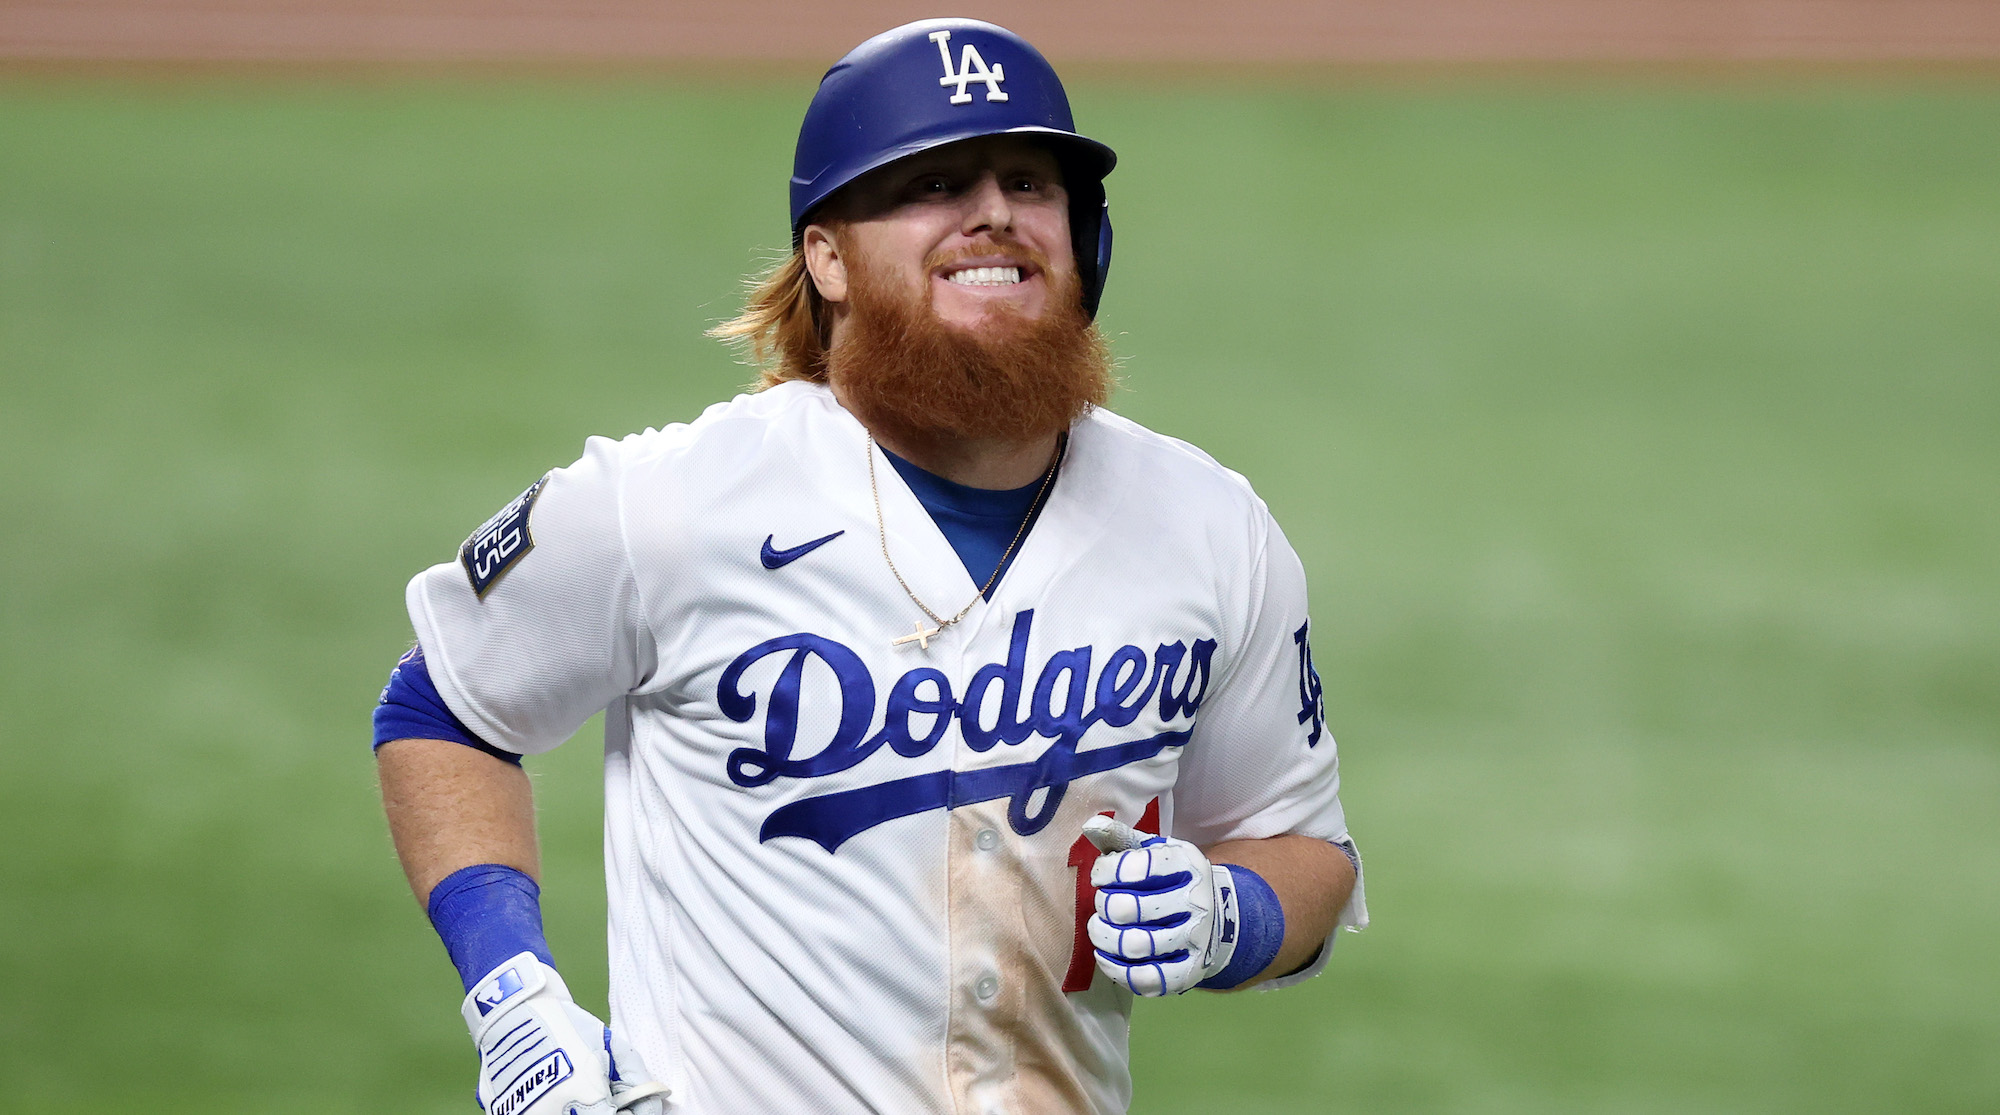 ARLINGTON, TEXAS - OCTOBER 27: Justin Turner #10 of the Los Angeles Dodgers reacts after flying out against the Tampa Bay Rays during the sixth inning in Game Six of the 2020 MLB World Series at Globe Life Field on October 27, 2020 in Arlington, Texas. (Photo by Tom Pennington/Getty Images)